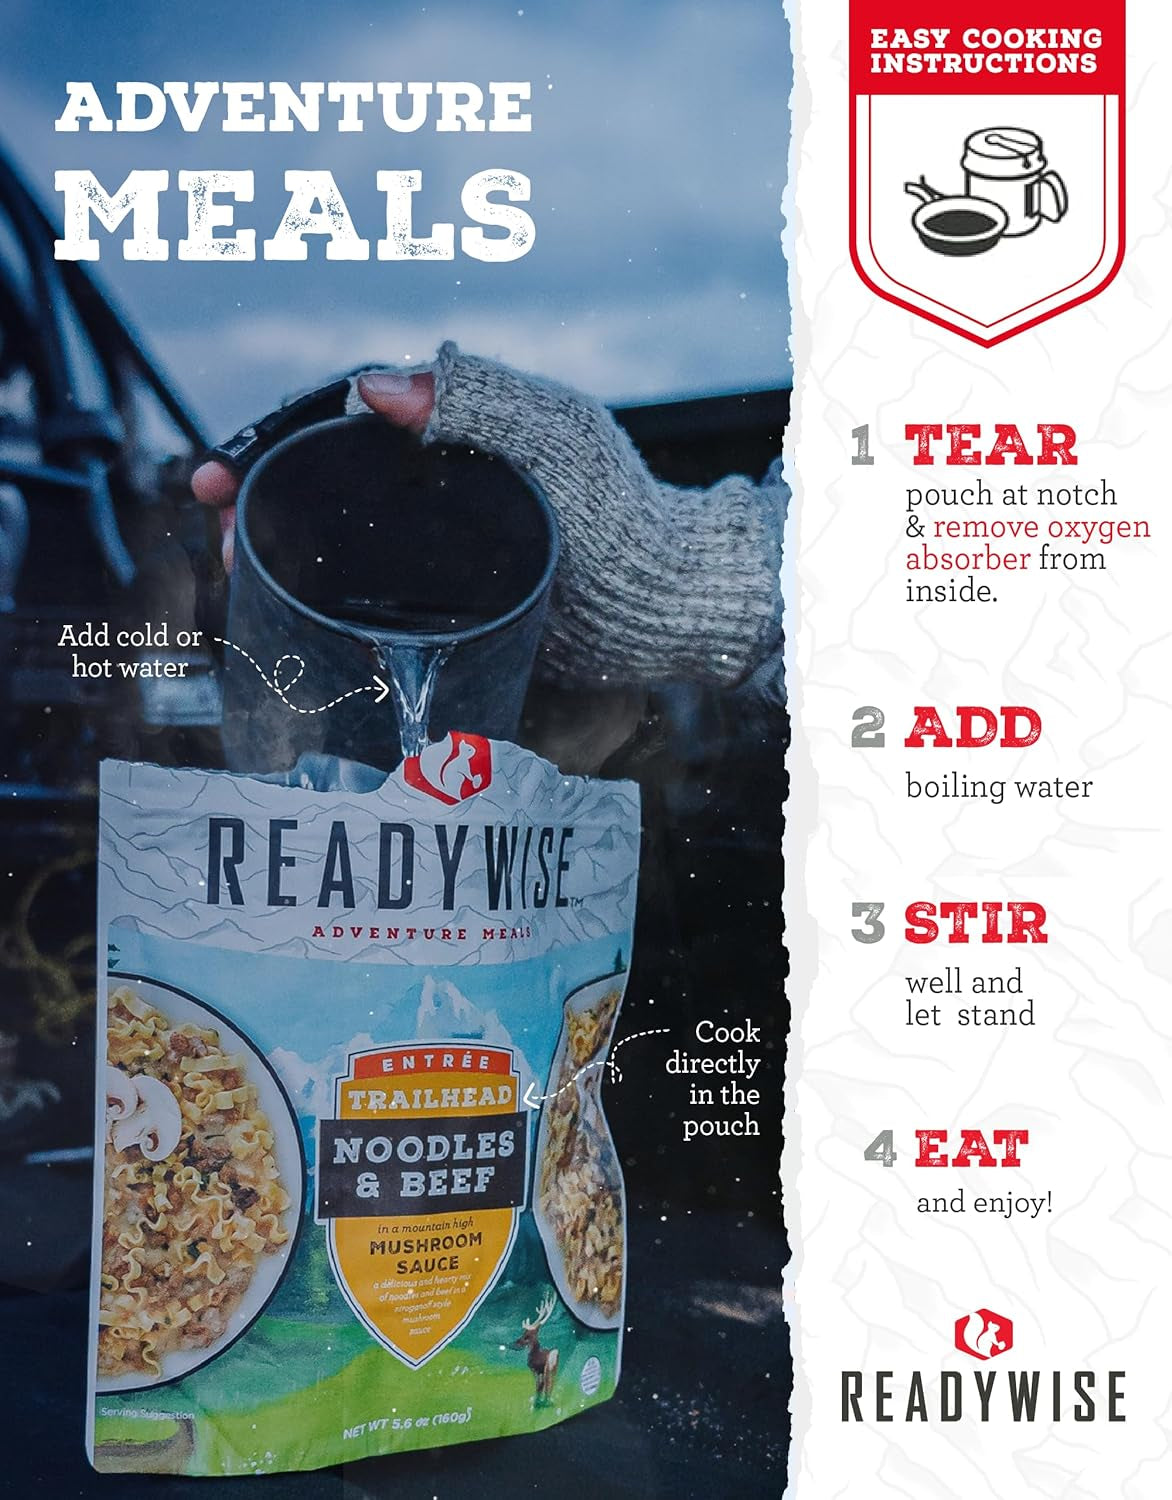 - Adventure Meal, Wild Rice Risotto, 2 Servings, Pack of 1, Emergency Preparedness, Freeze Dried Food, MRE, Snack Pack or Emergency Food, Backpacking, Camping, Hiking, And, Survival Food